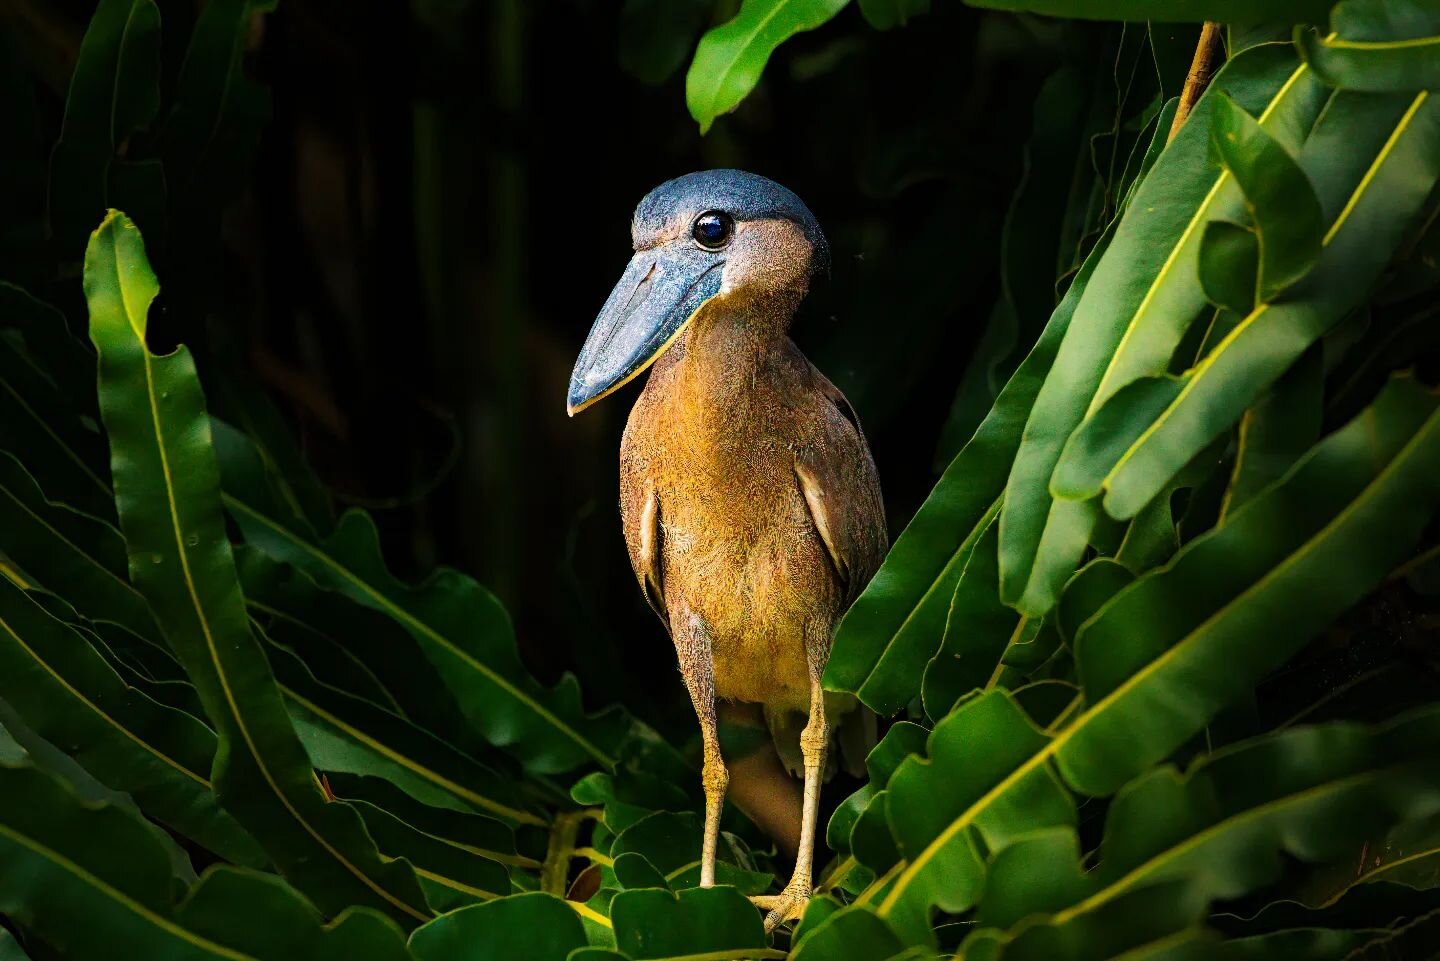 The beautiful nocturnal heron of mangroves and freshwater marshes in tropical lowlands; spends the daytime roosting in trees, often in loose groups.  The bird comes out at night to feed along the edge of lakes and rivers. Easily identified by huge &l